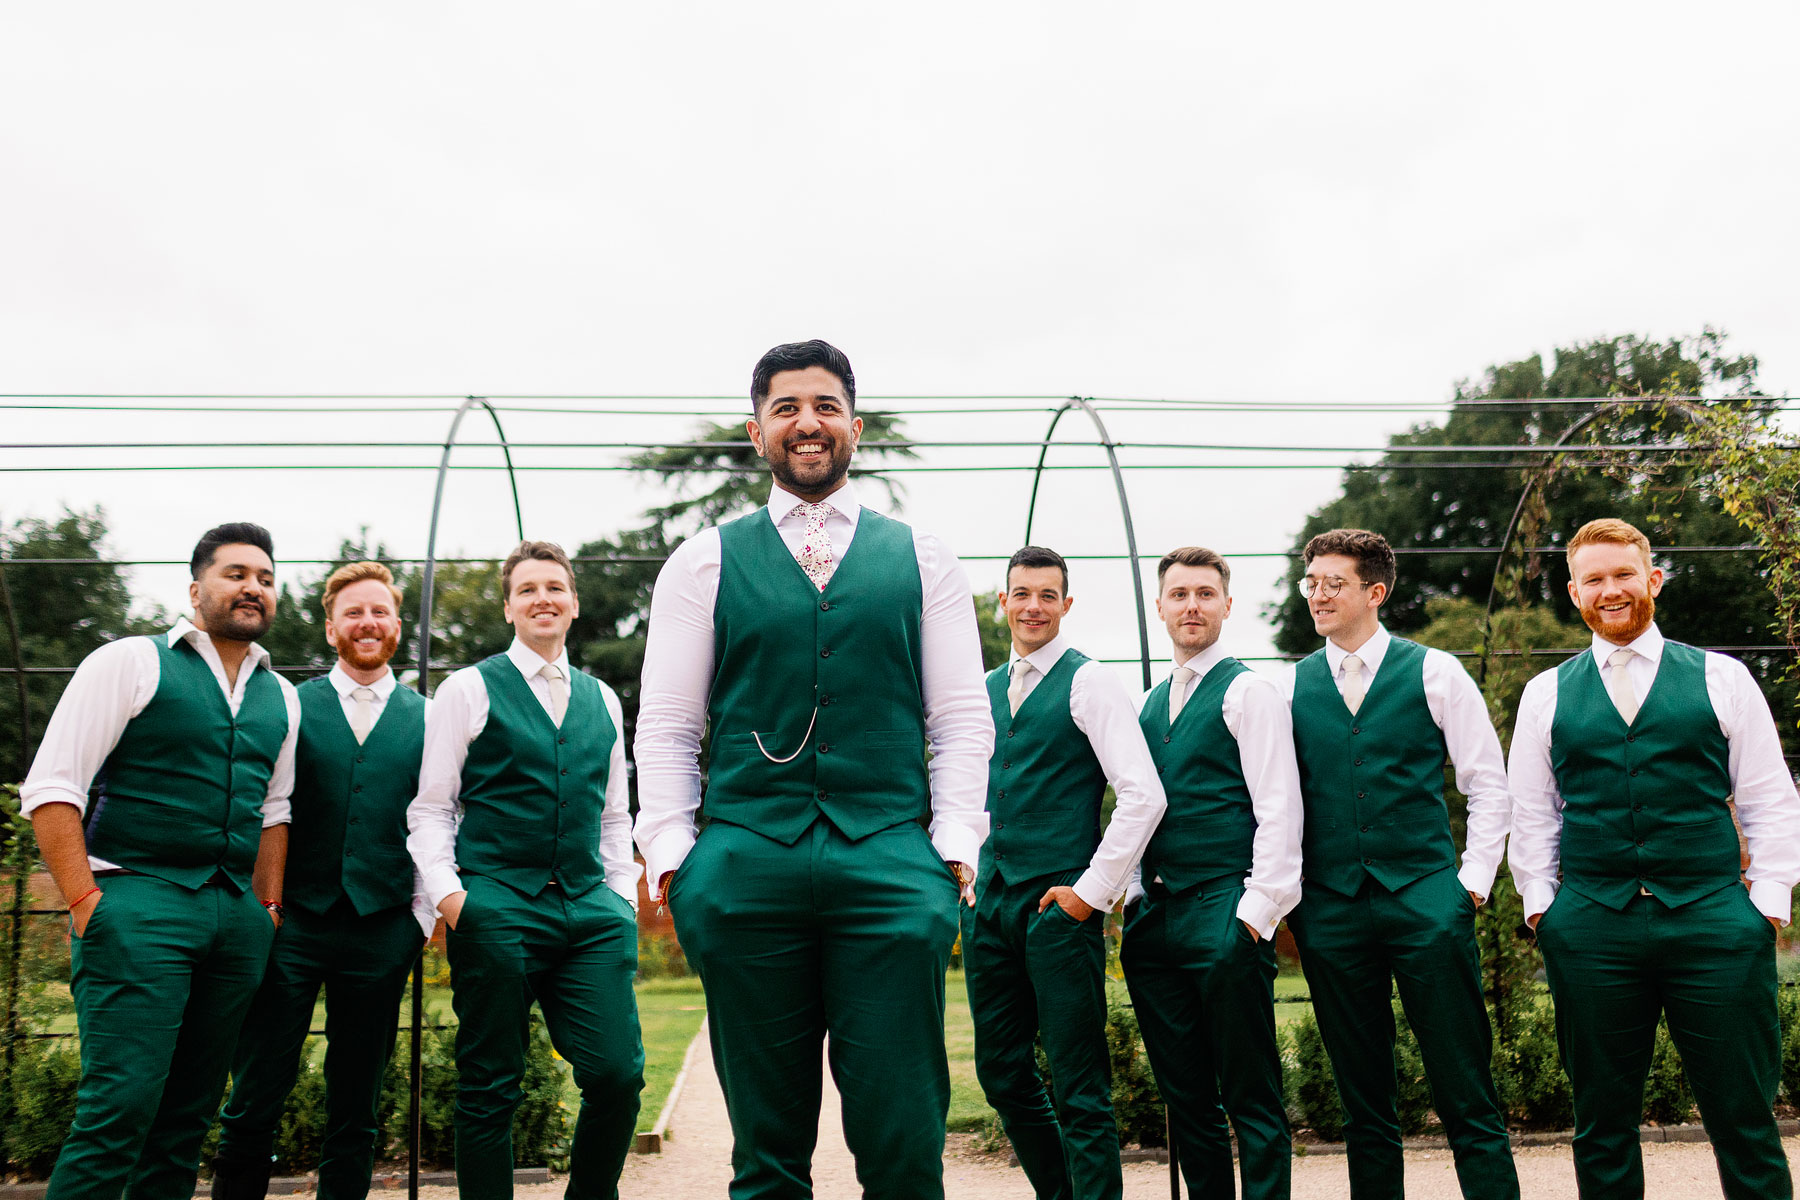 colourful and fun wedding at thorpe gardens in staffordshire